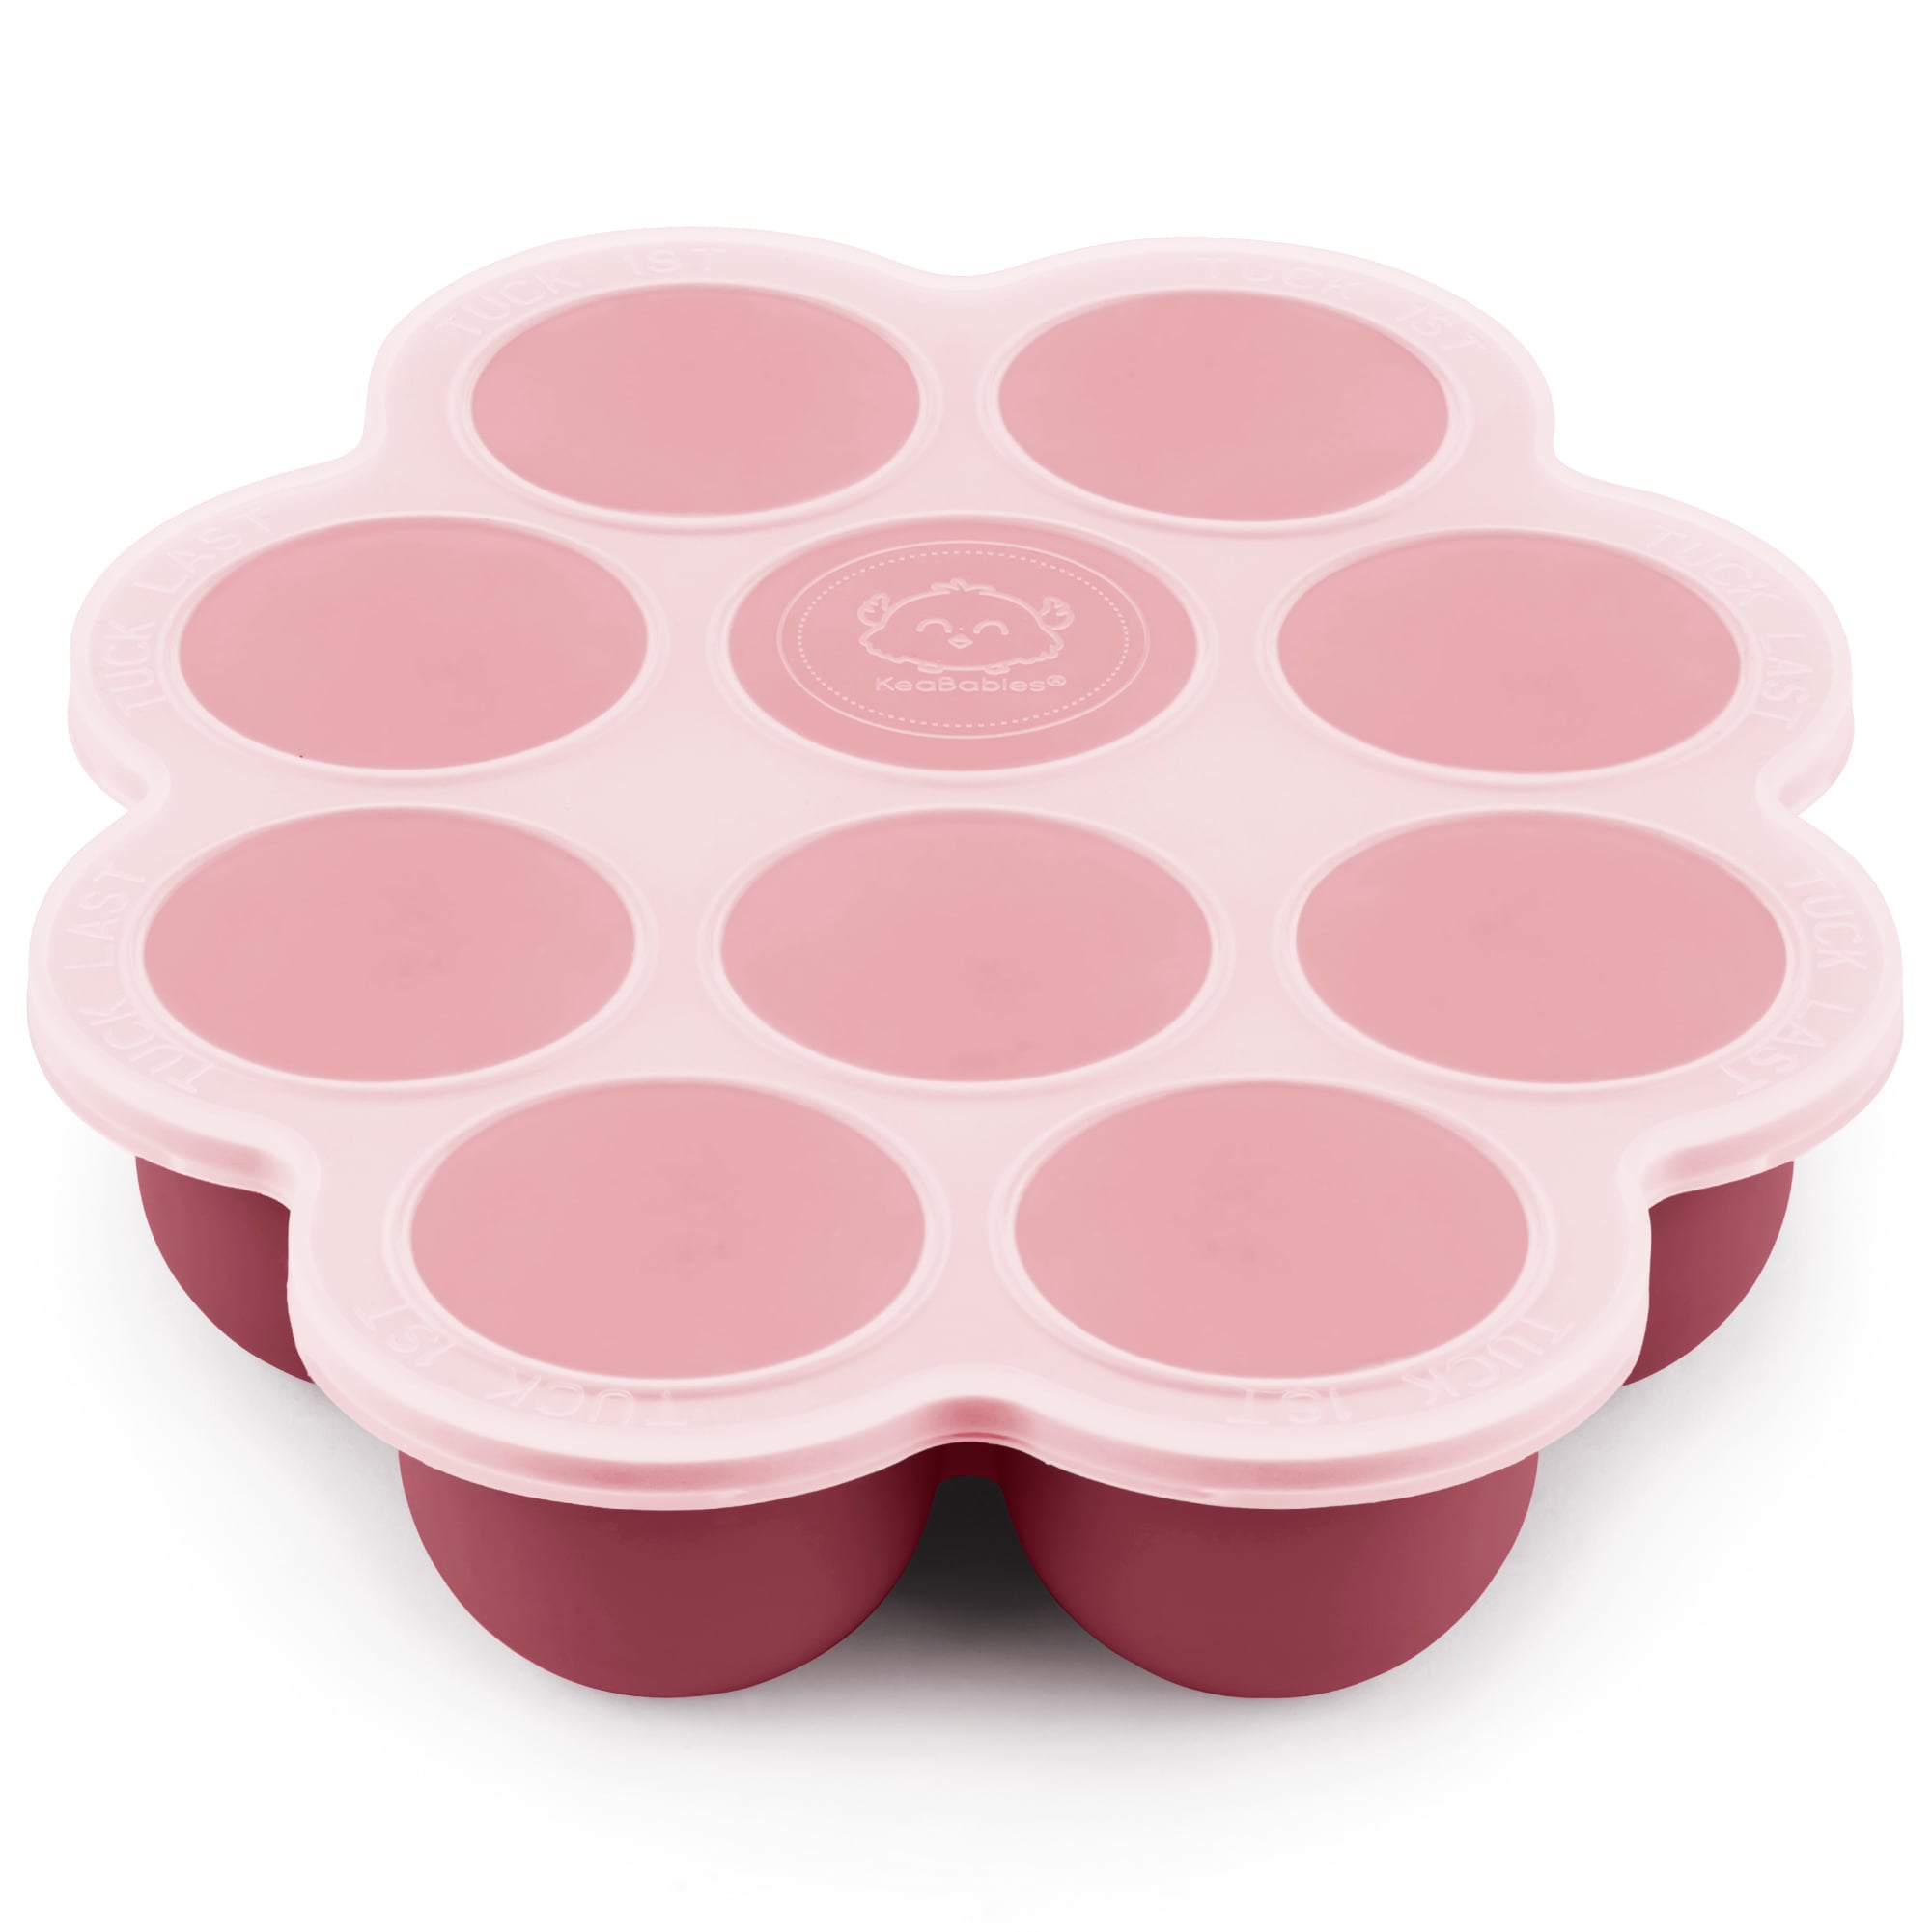 Grandest Birch Silicone Weaning Baby Food Silicone Freezer Tray Storage Container BPA Free BPA Free Free 7 Compartments Baby Food, Size: 16, Red